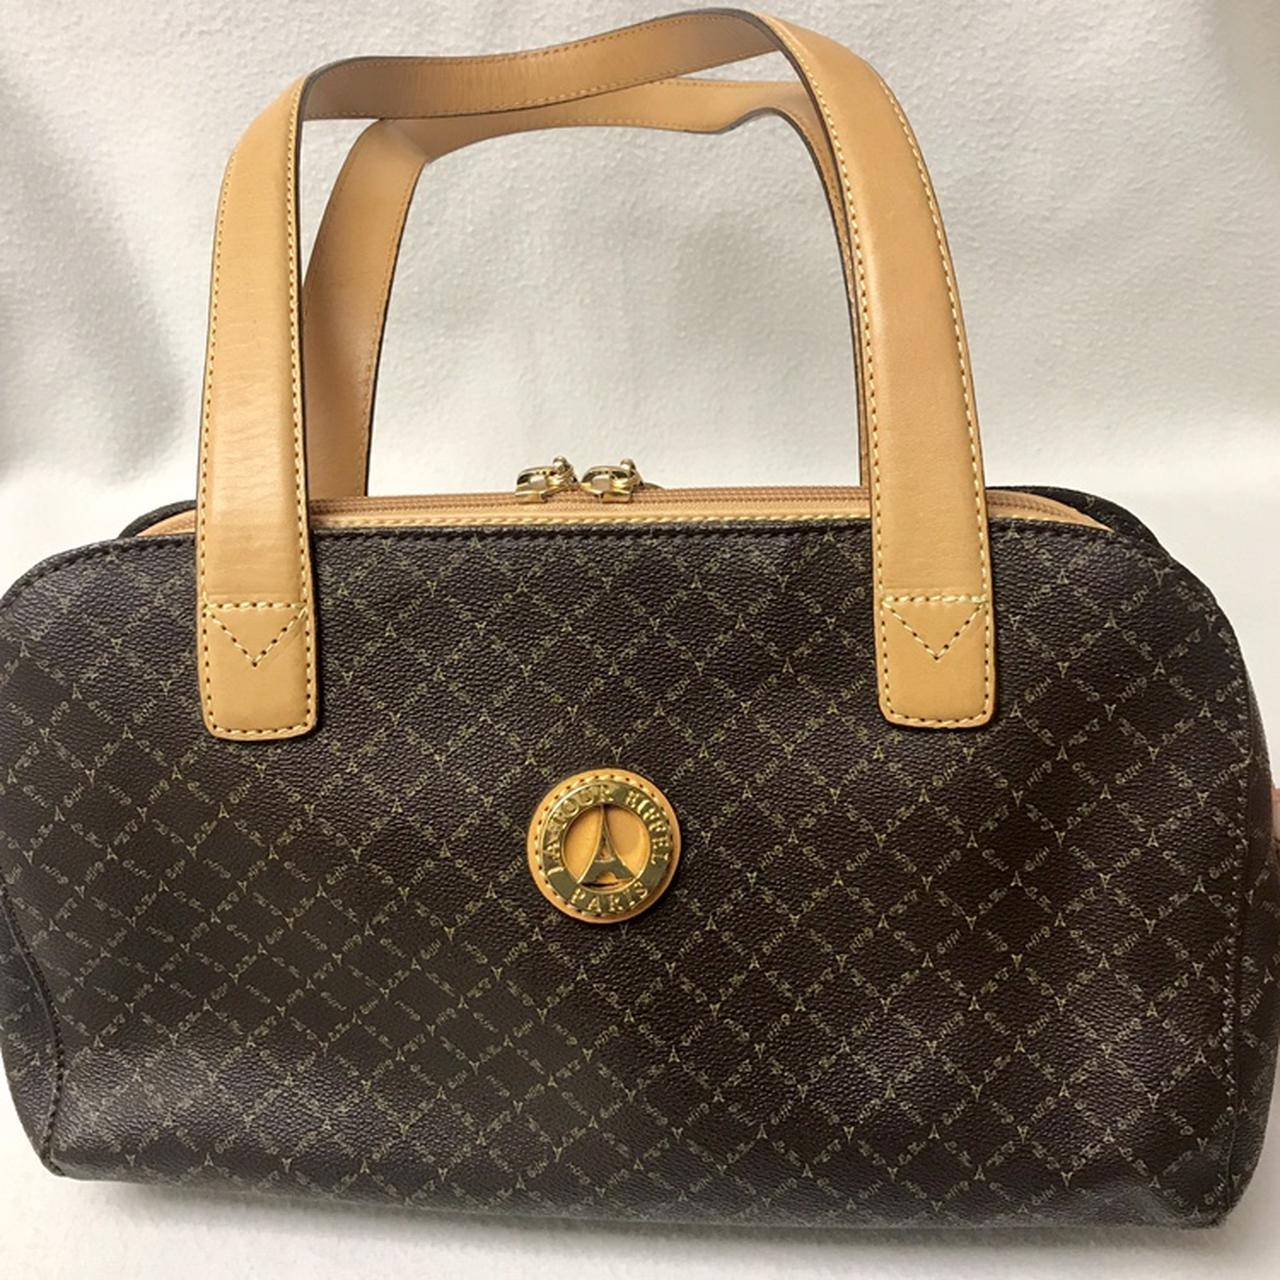 La Tour Eiffel Purse Brown And Ran Shoulder And Multi Wear Bag for Sale in  Galloway, NJ - OfferUp